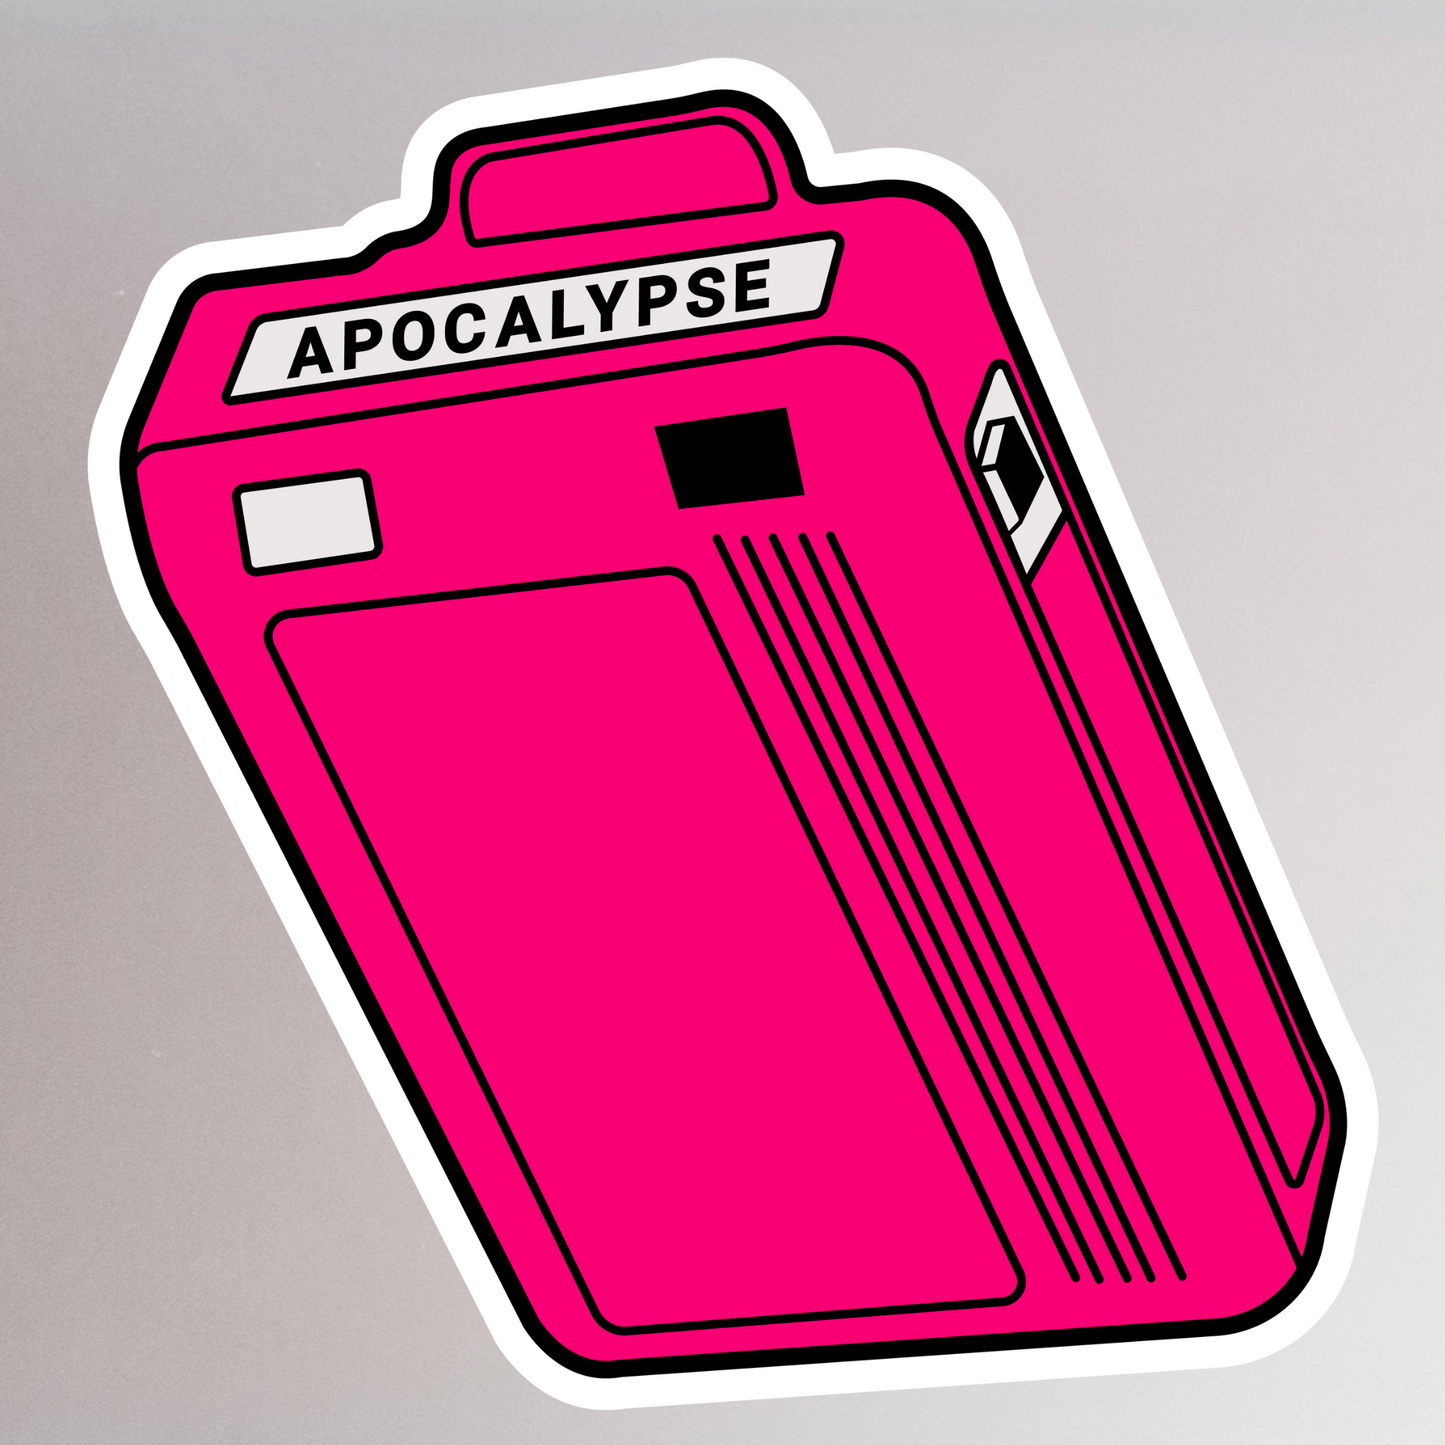 If the Apocalypse Comes, Beep Me! Pager.